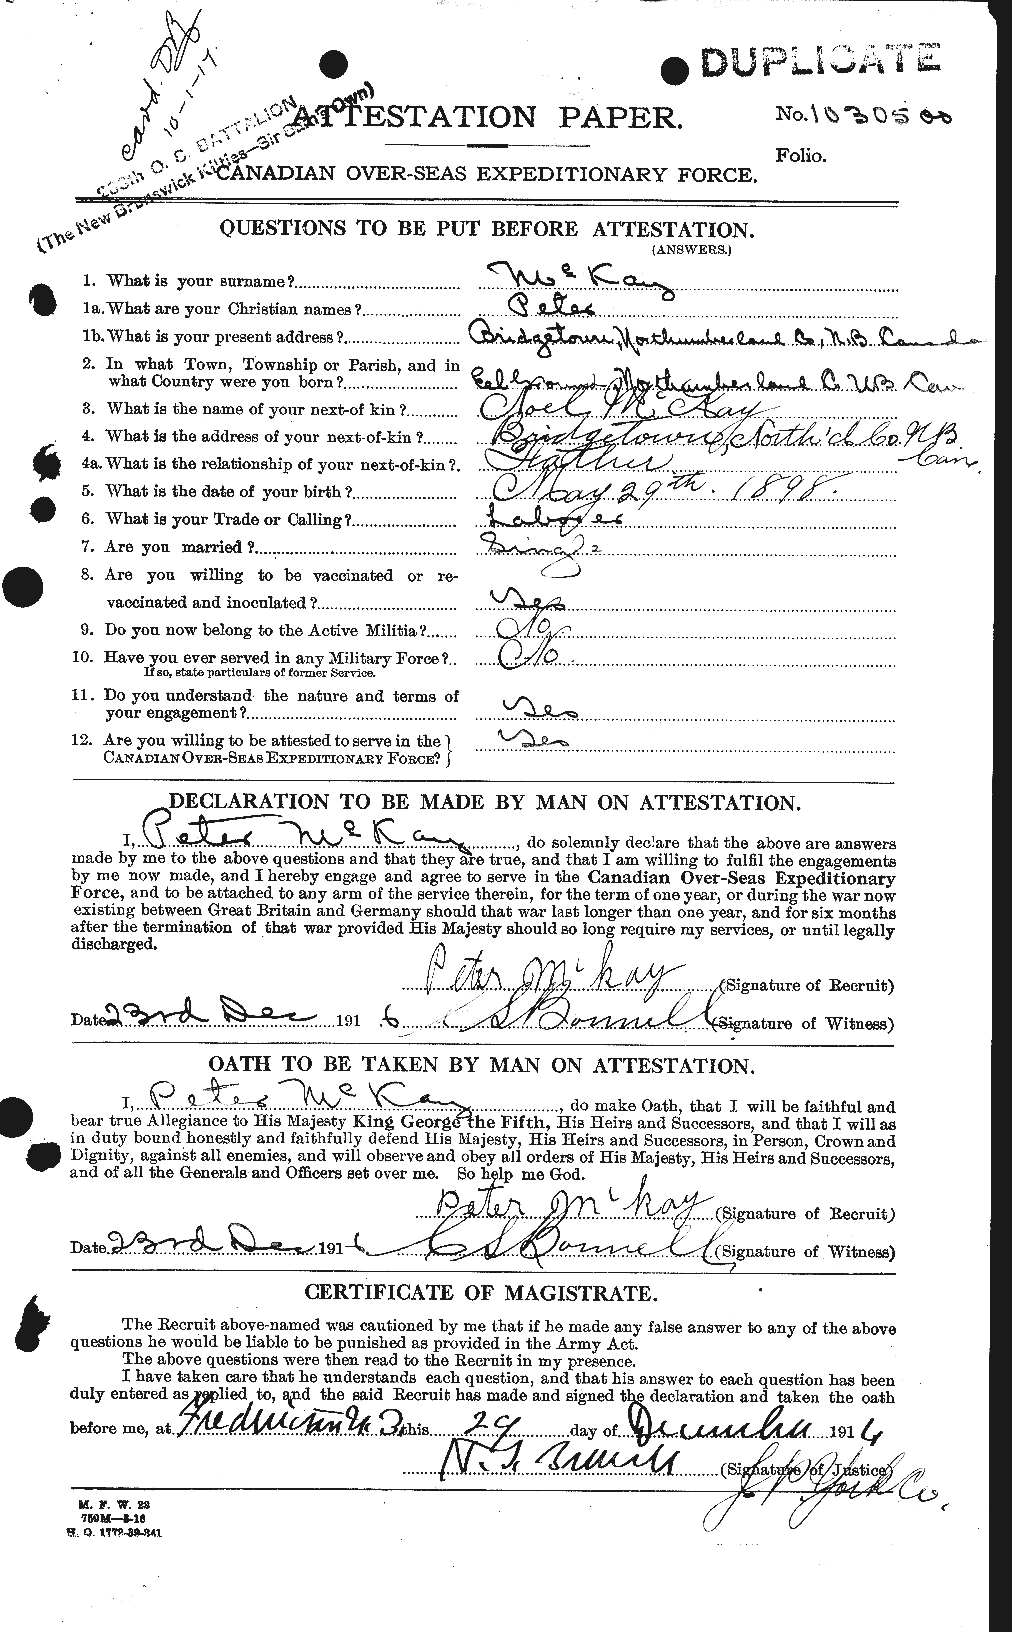 Personnel Records of the First World War - CEF 527240a